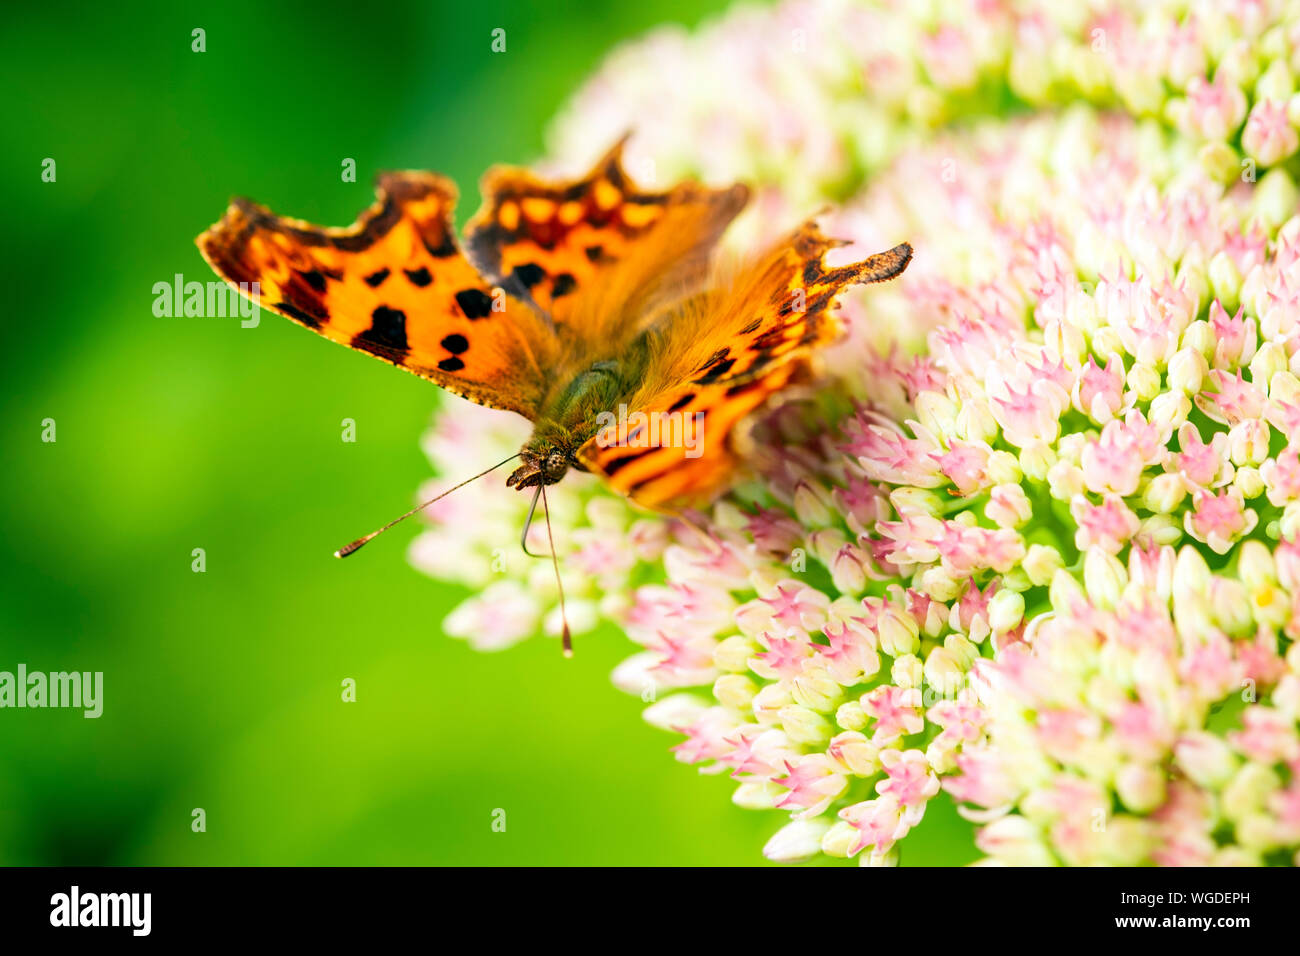 Comma butterfly UK feeding on a sedum flower. Polygonia c-album with its tongue probing flowers. Stock Photo